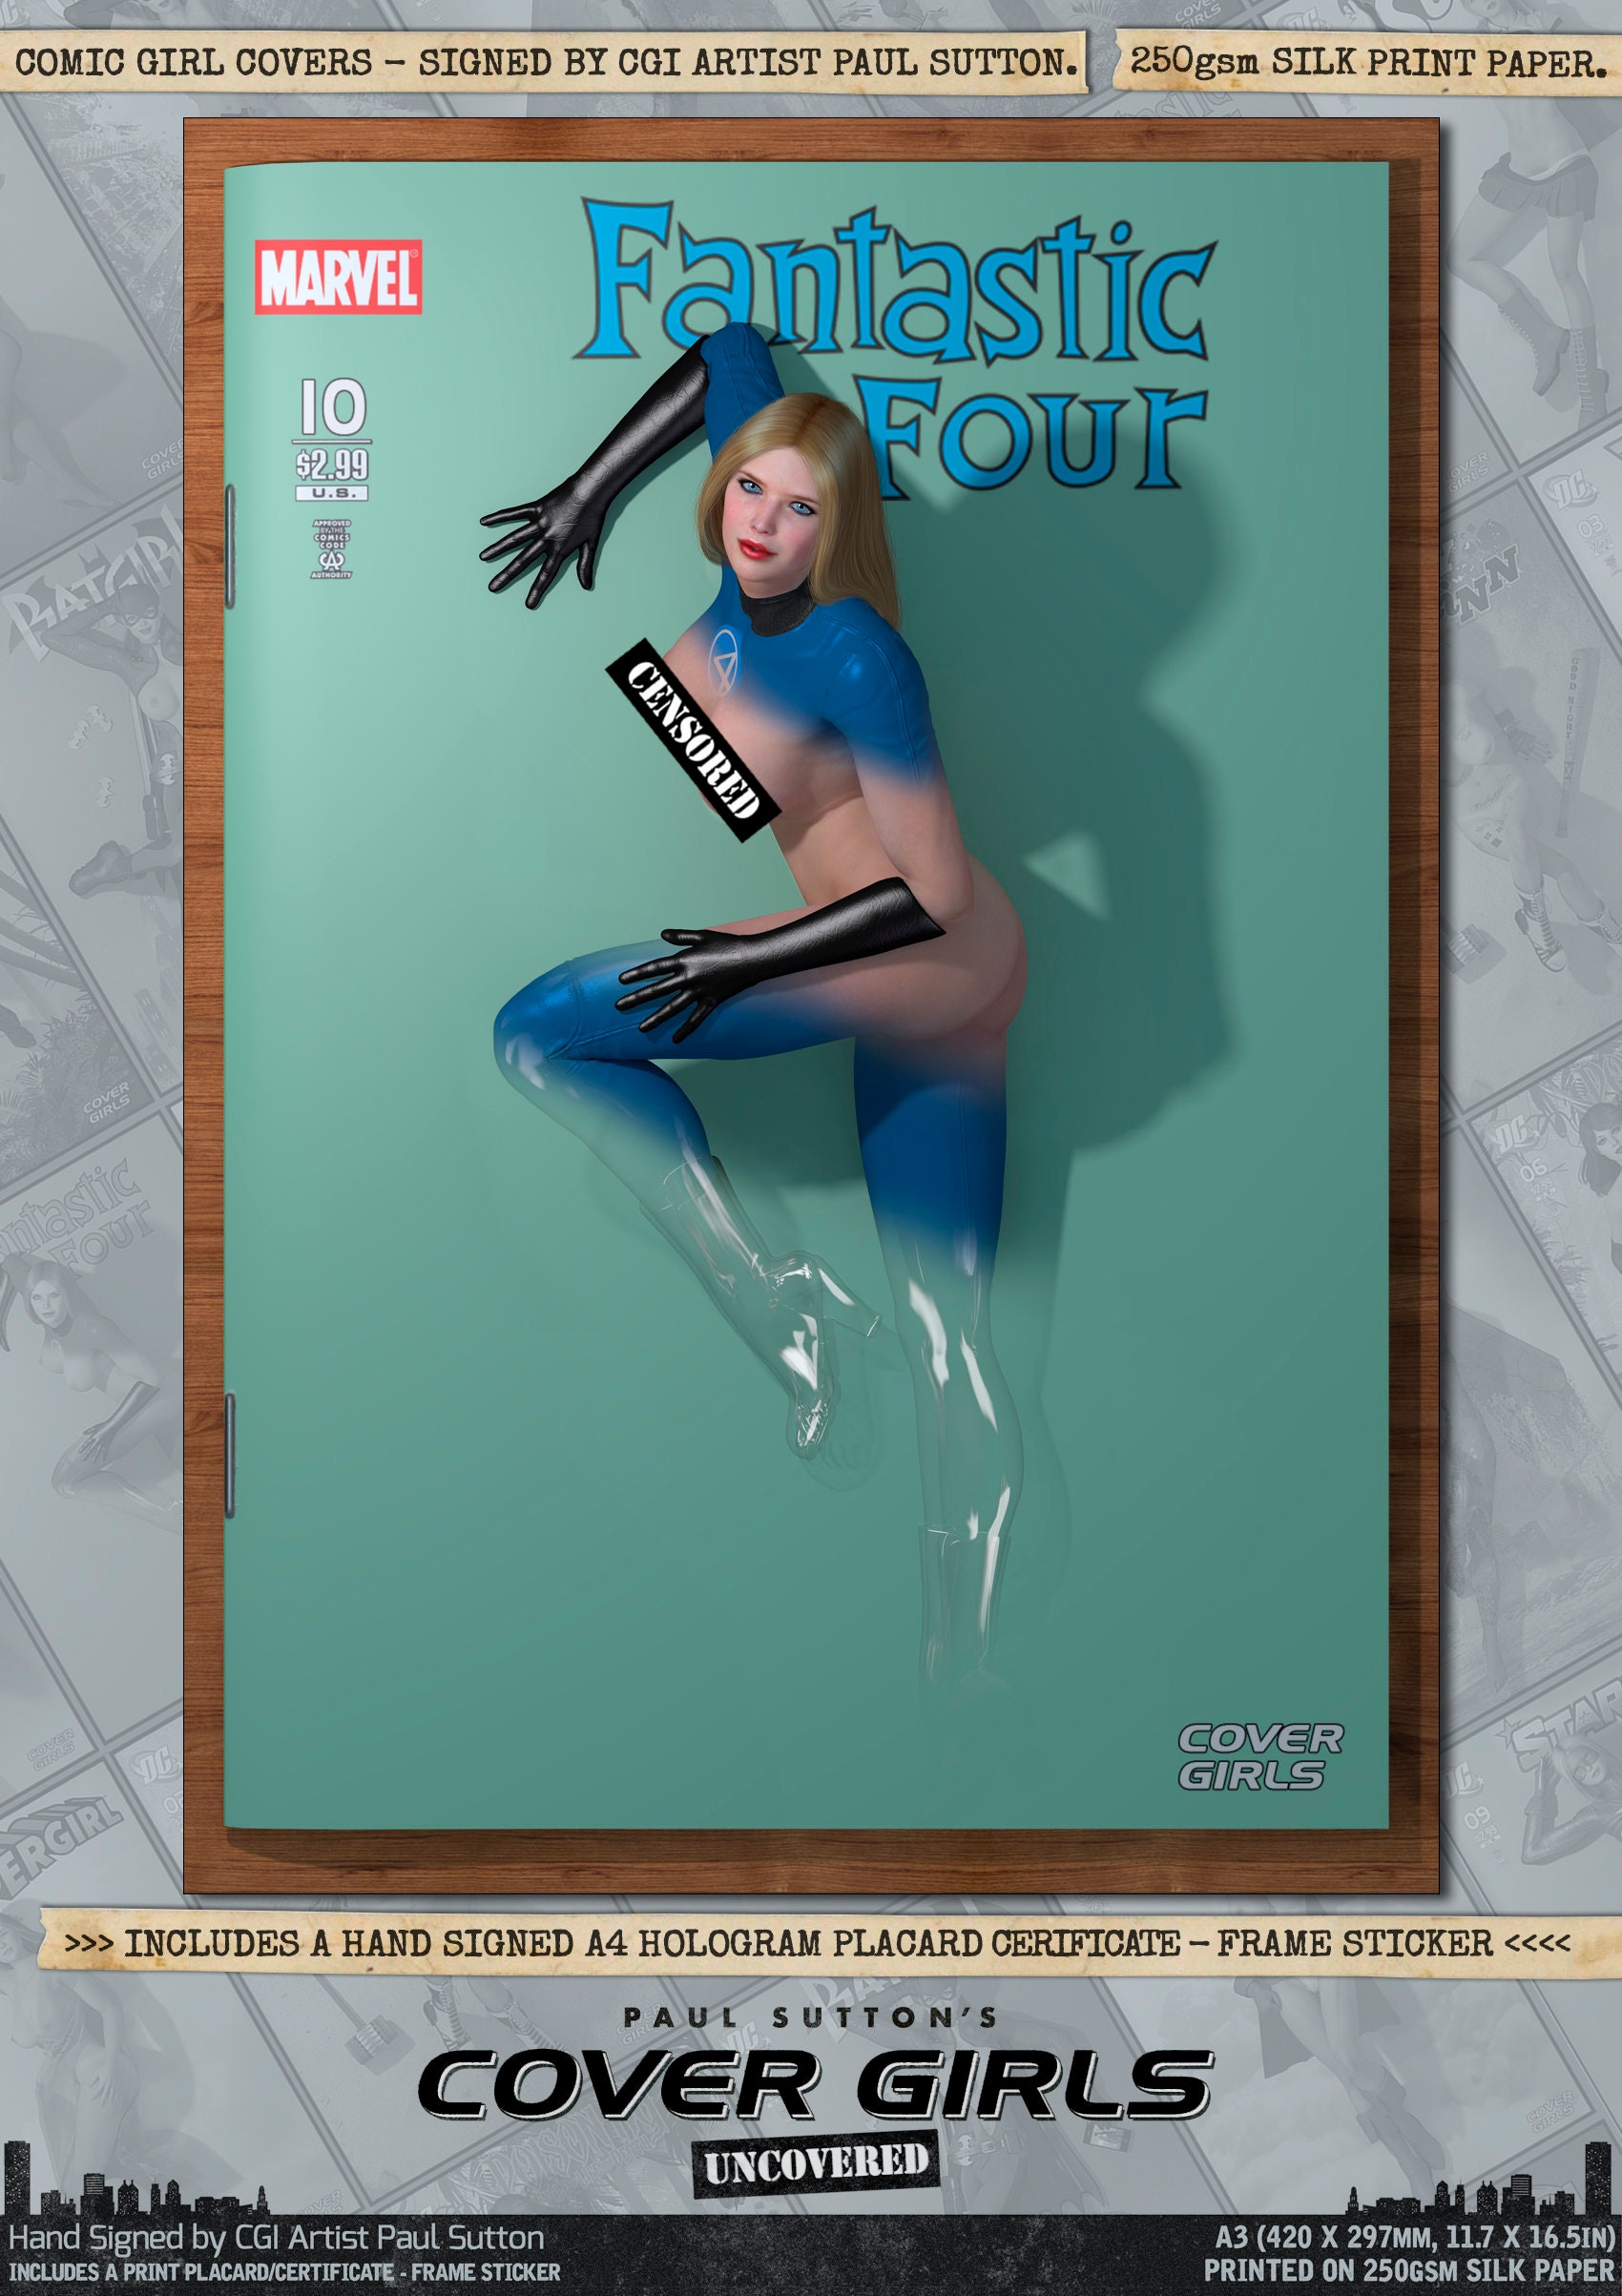 Invisible Woman Fantastic Four NUDE Pin-up cover Girls